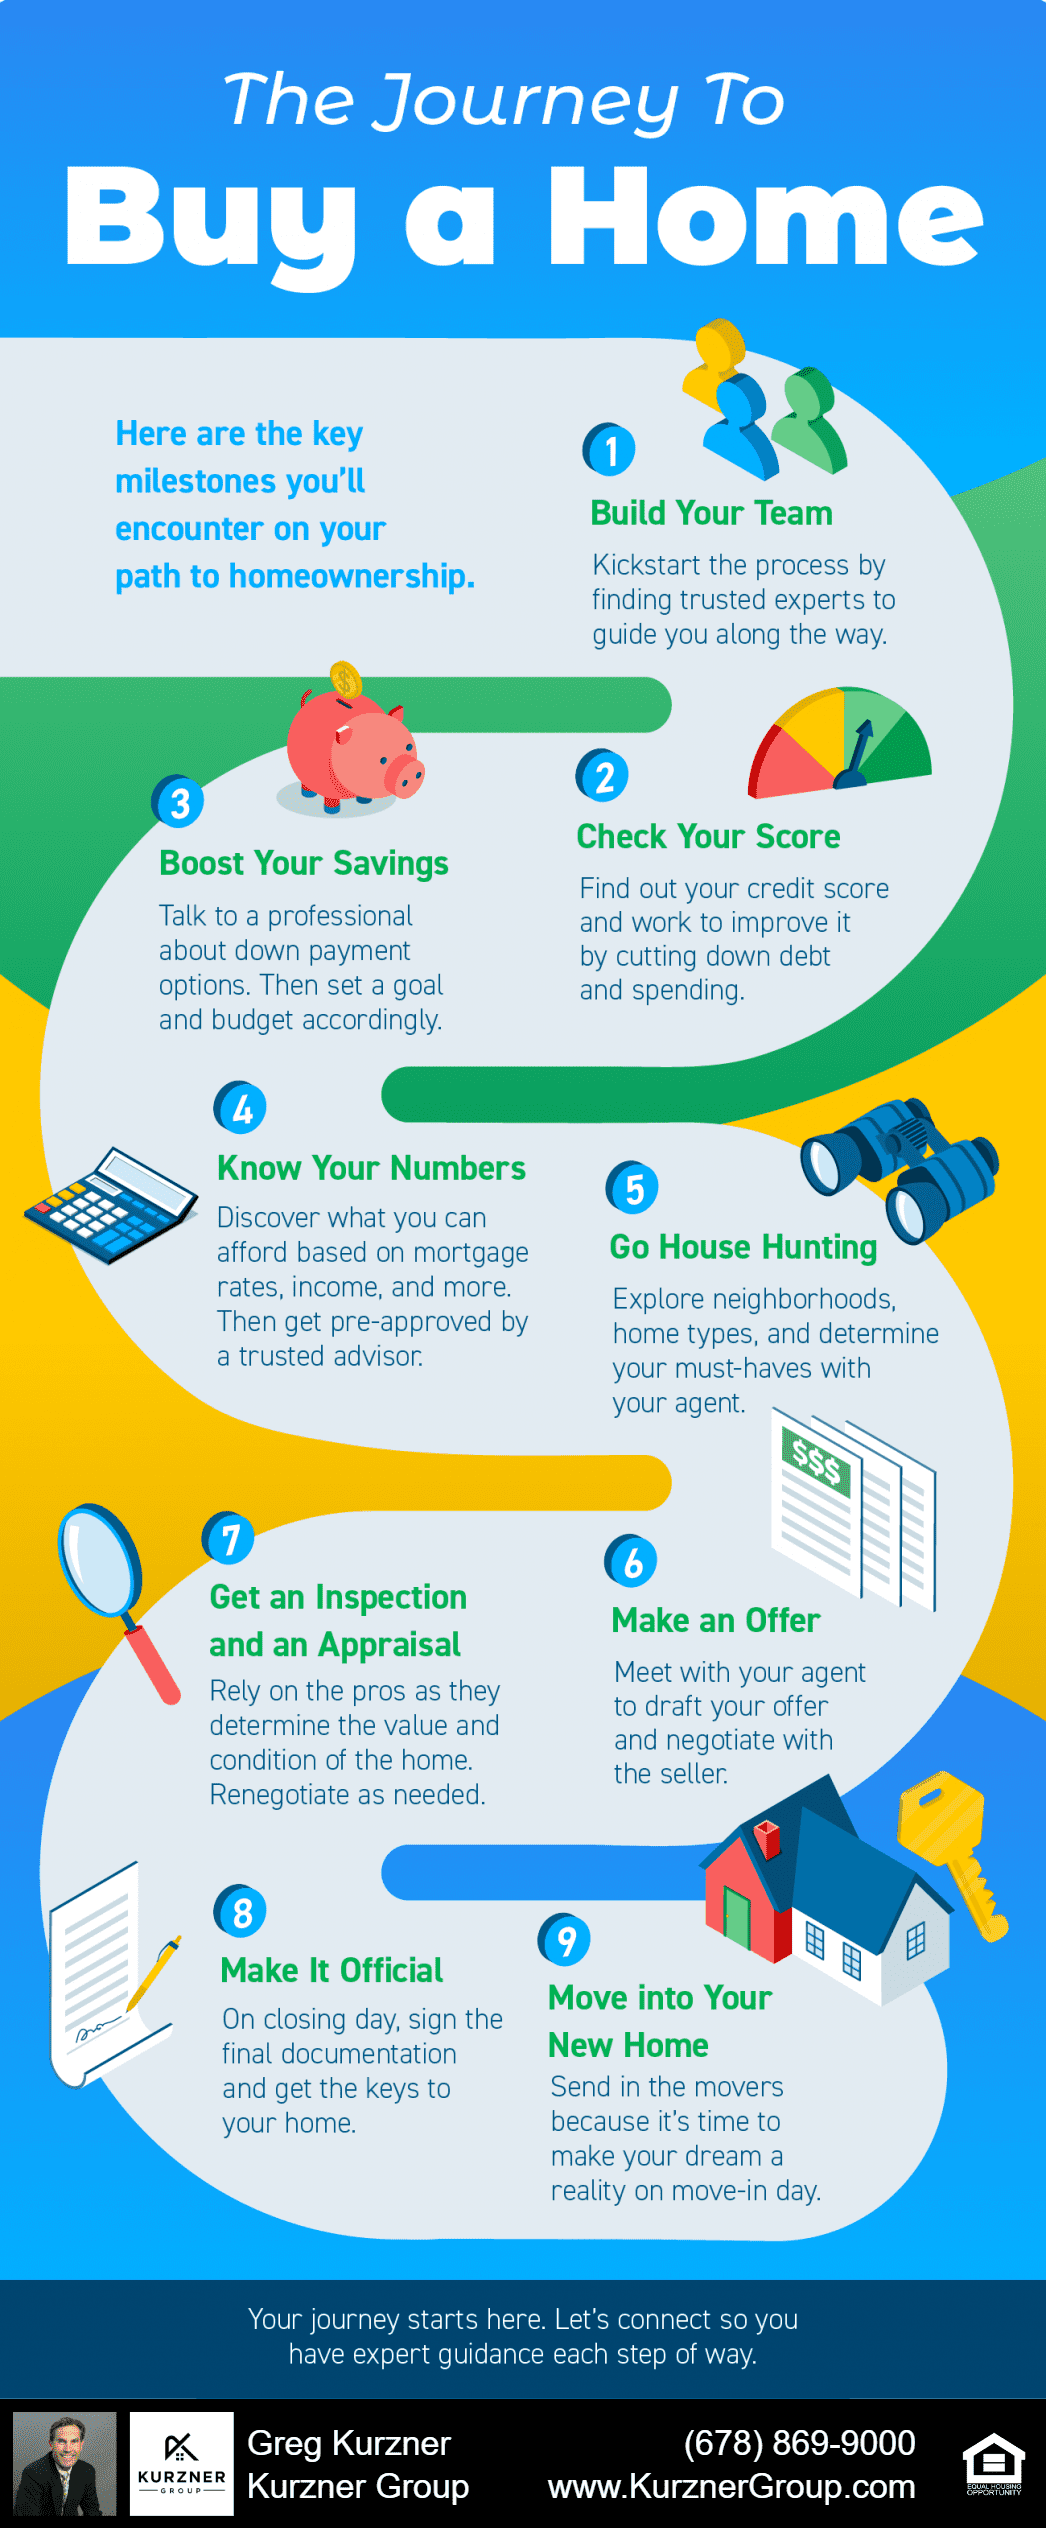 The Journey To Buy a Home [INFOGRAPHIC]